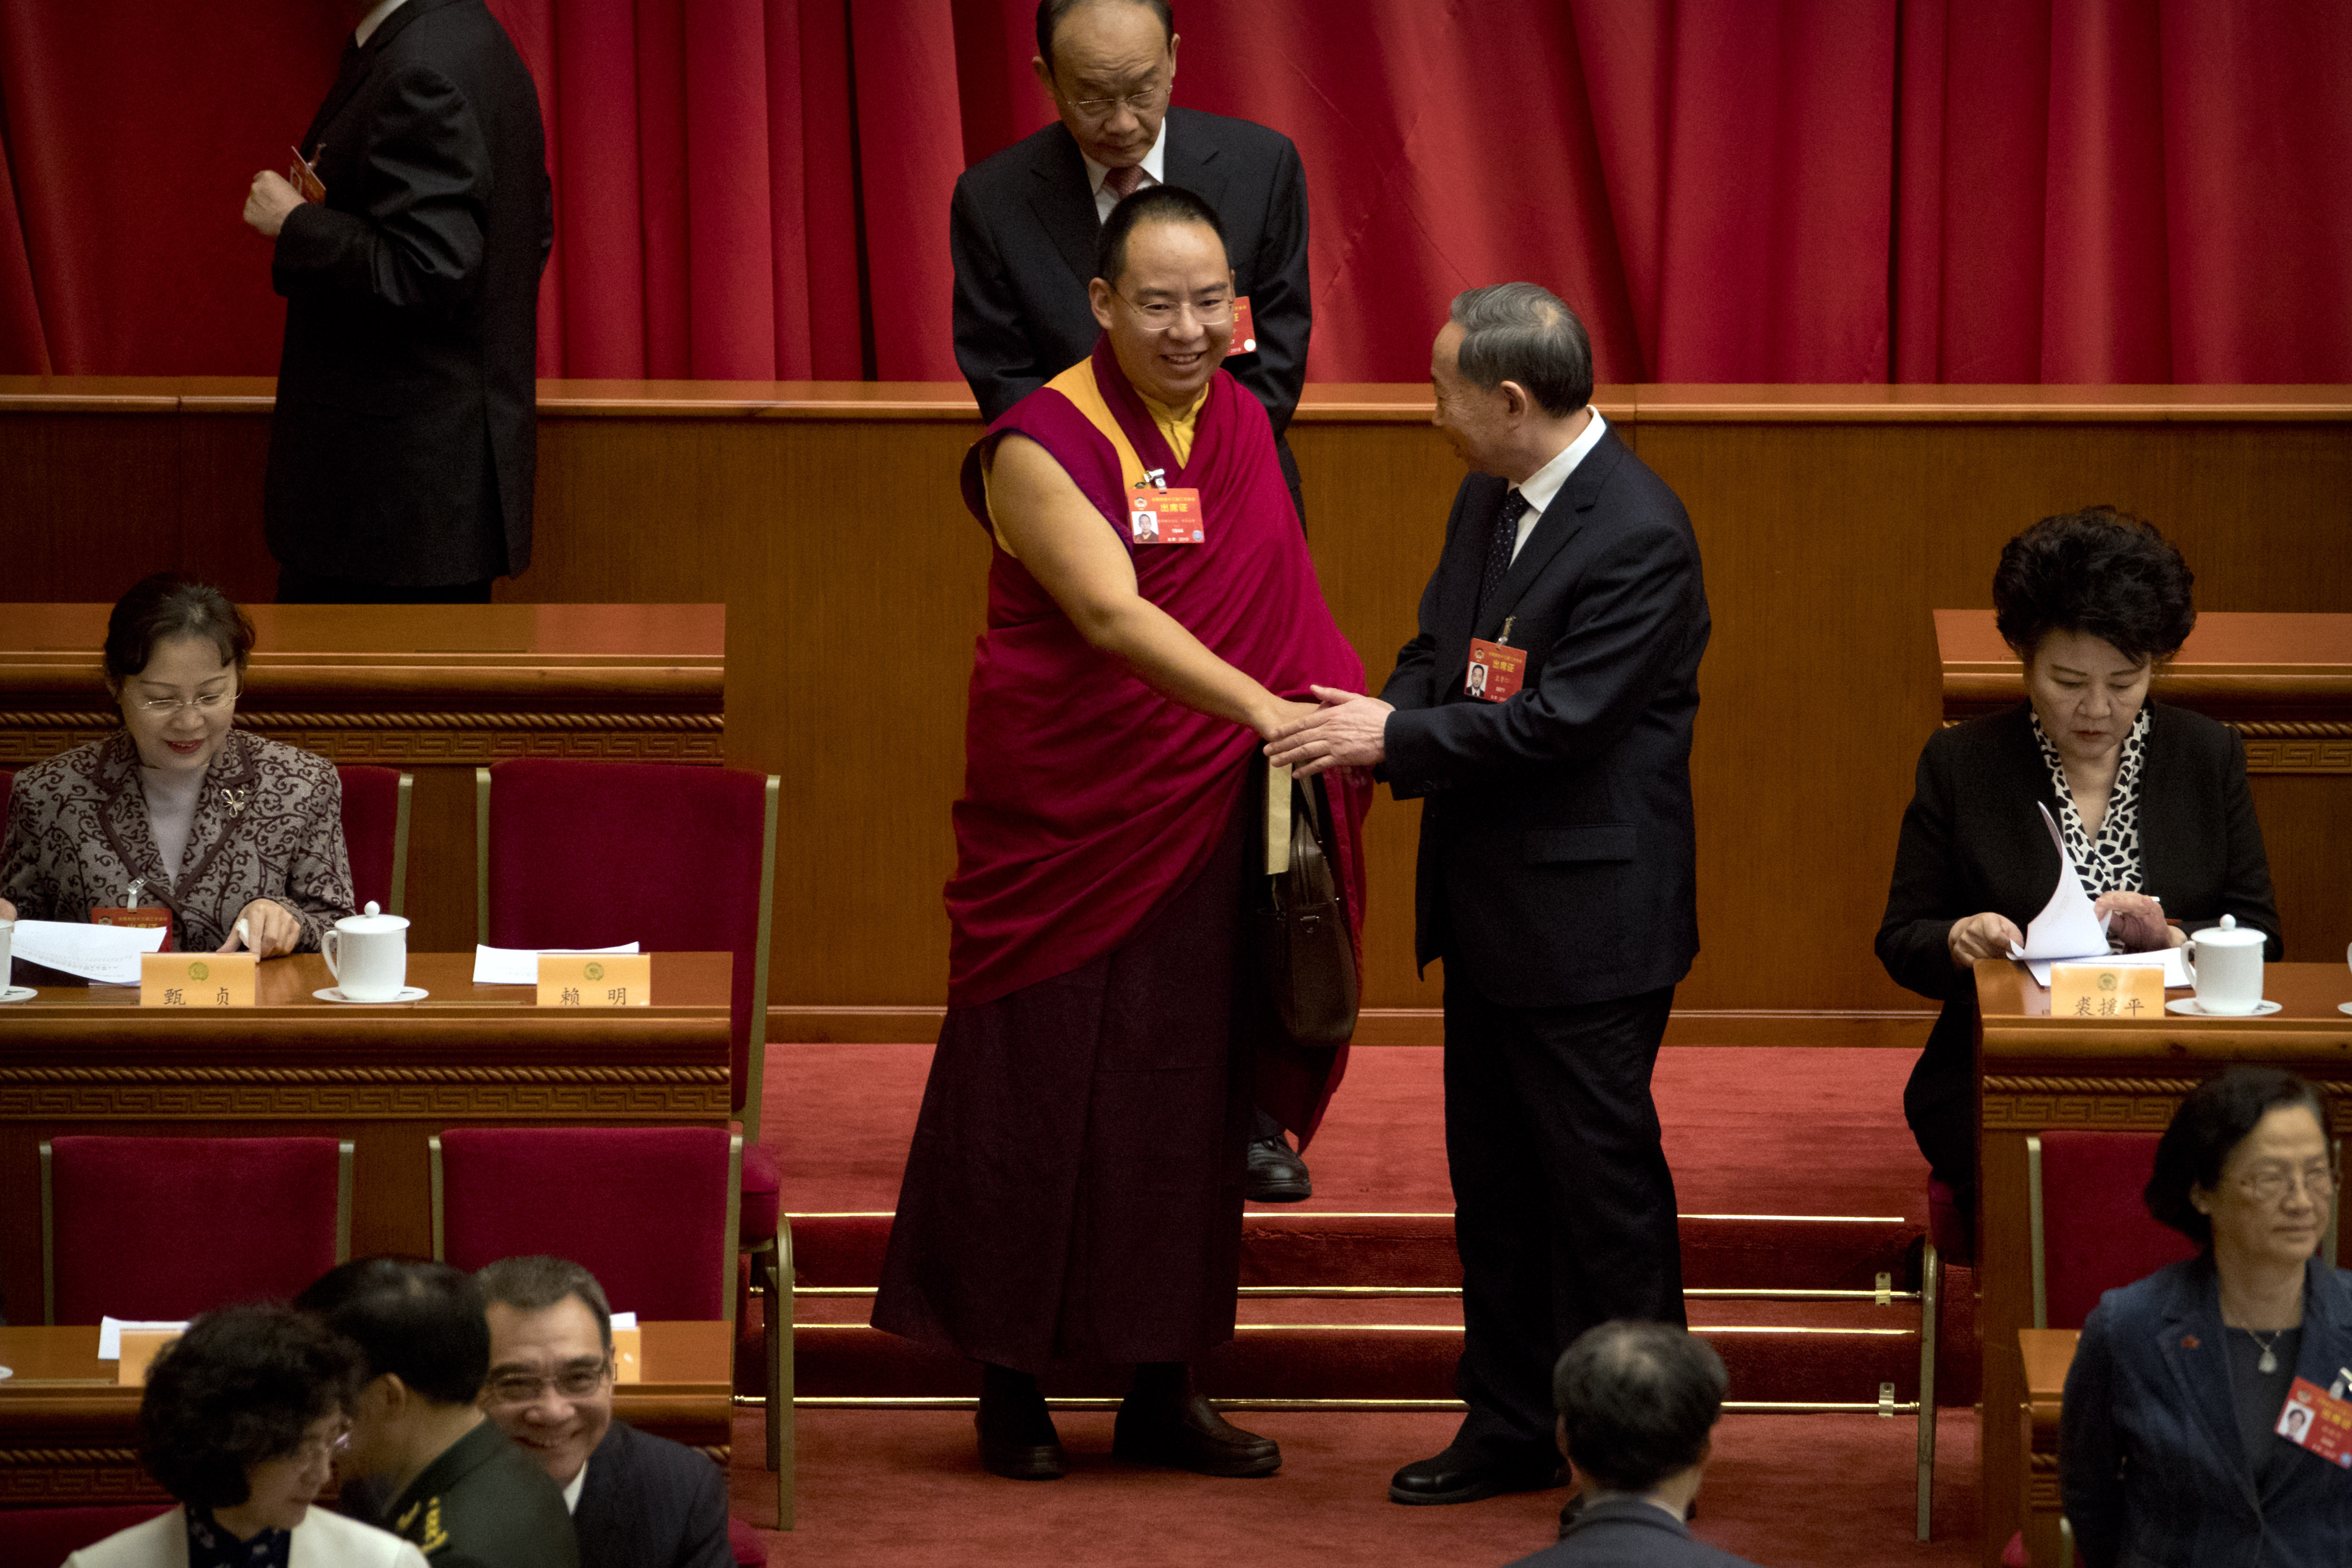 The 11th Panchen Lama Bainqen Erdini Qoigyijabu, a member of the National Committee of the Chinese People's Political Consultative Conference (CPPCC), is greeted as he arrives for the closing session of the CPPCC at the Great Hall of the People in Beijing, Wednesday, March 13, 2019. (AP Photo/Mark Schiefelbein)